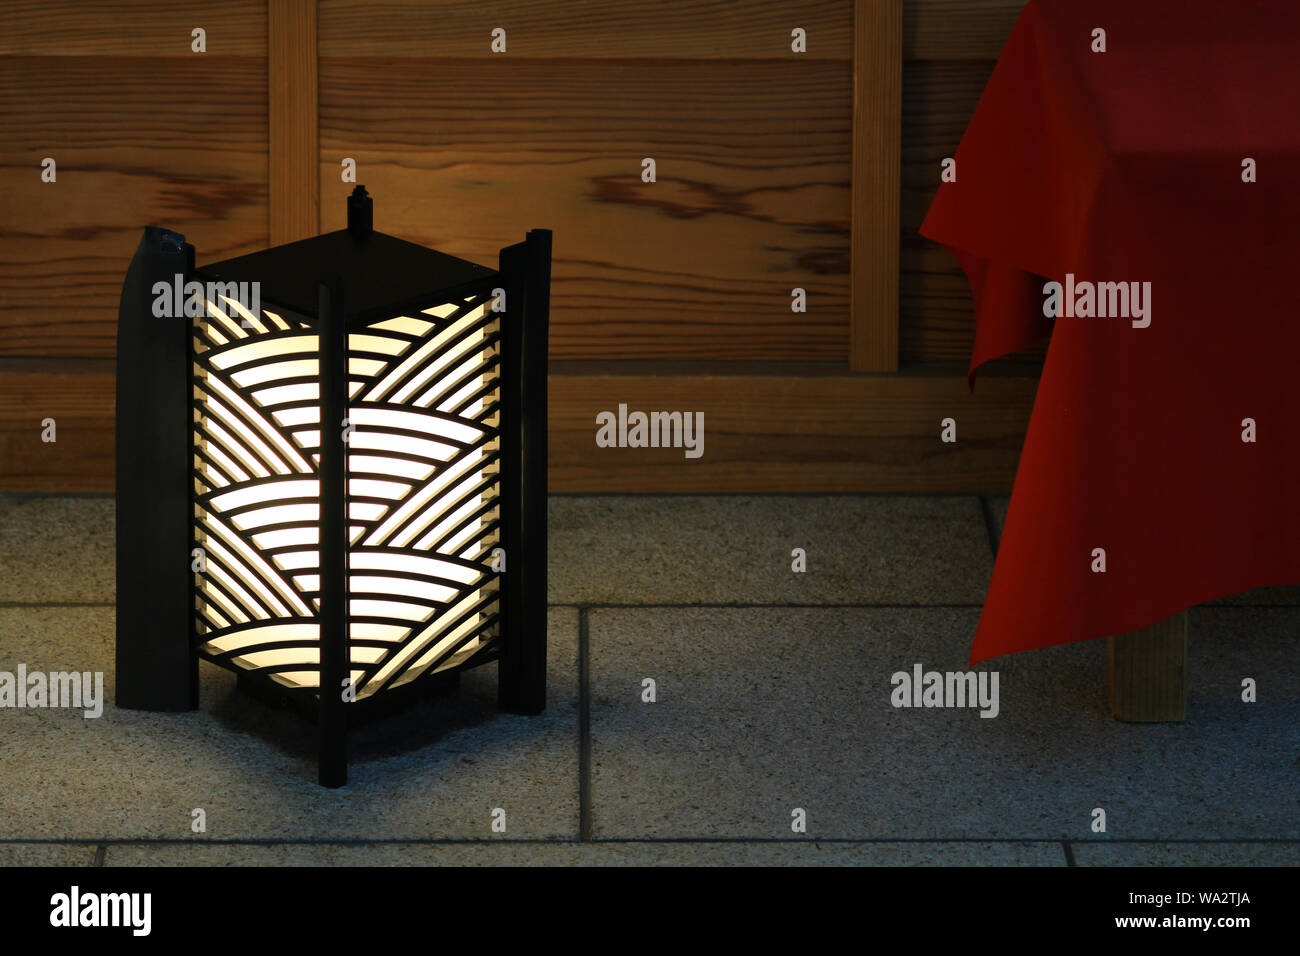 Japanese lanterns placed at the entrance of Japanese style architecture Stock Photo